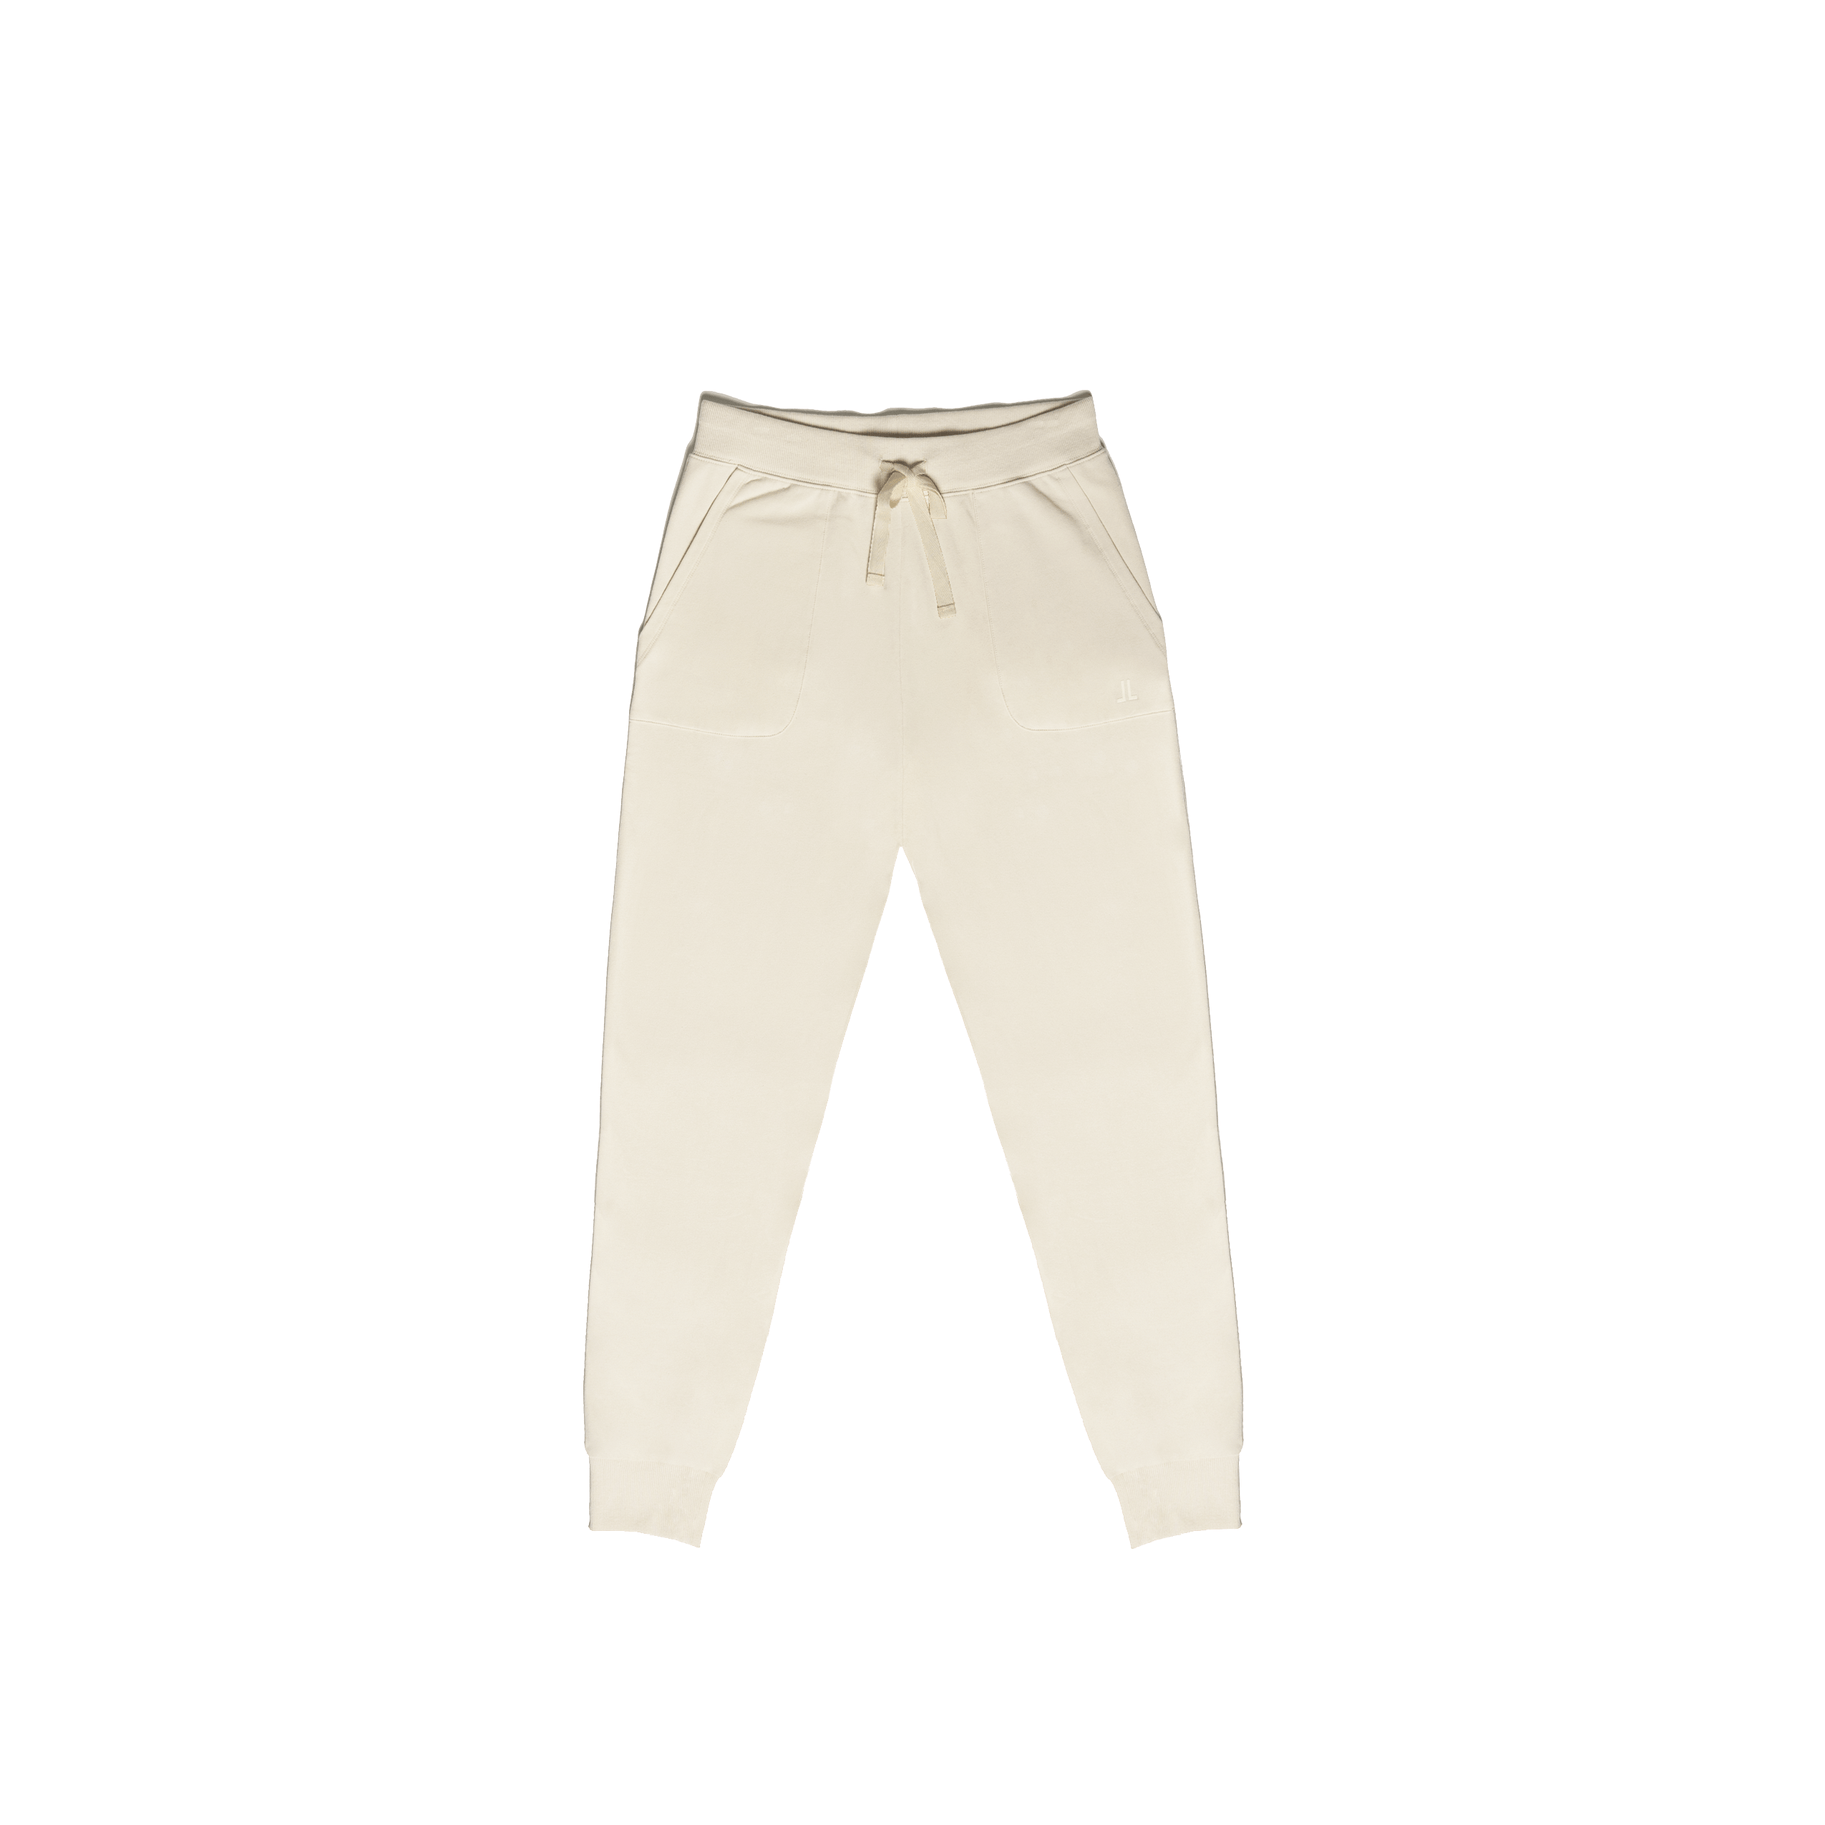 Latte Love Women's French Terry Jogger